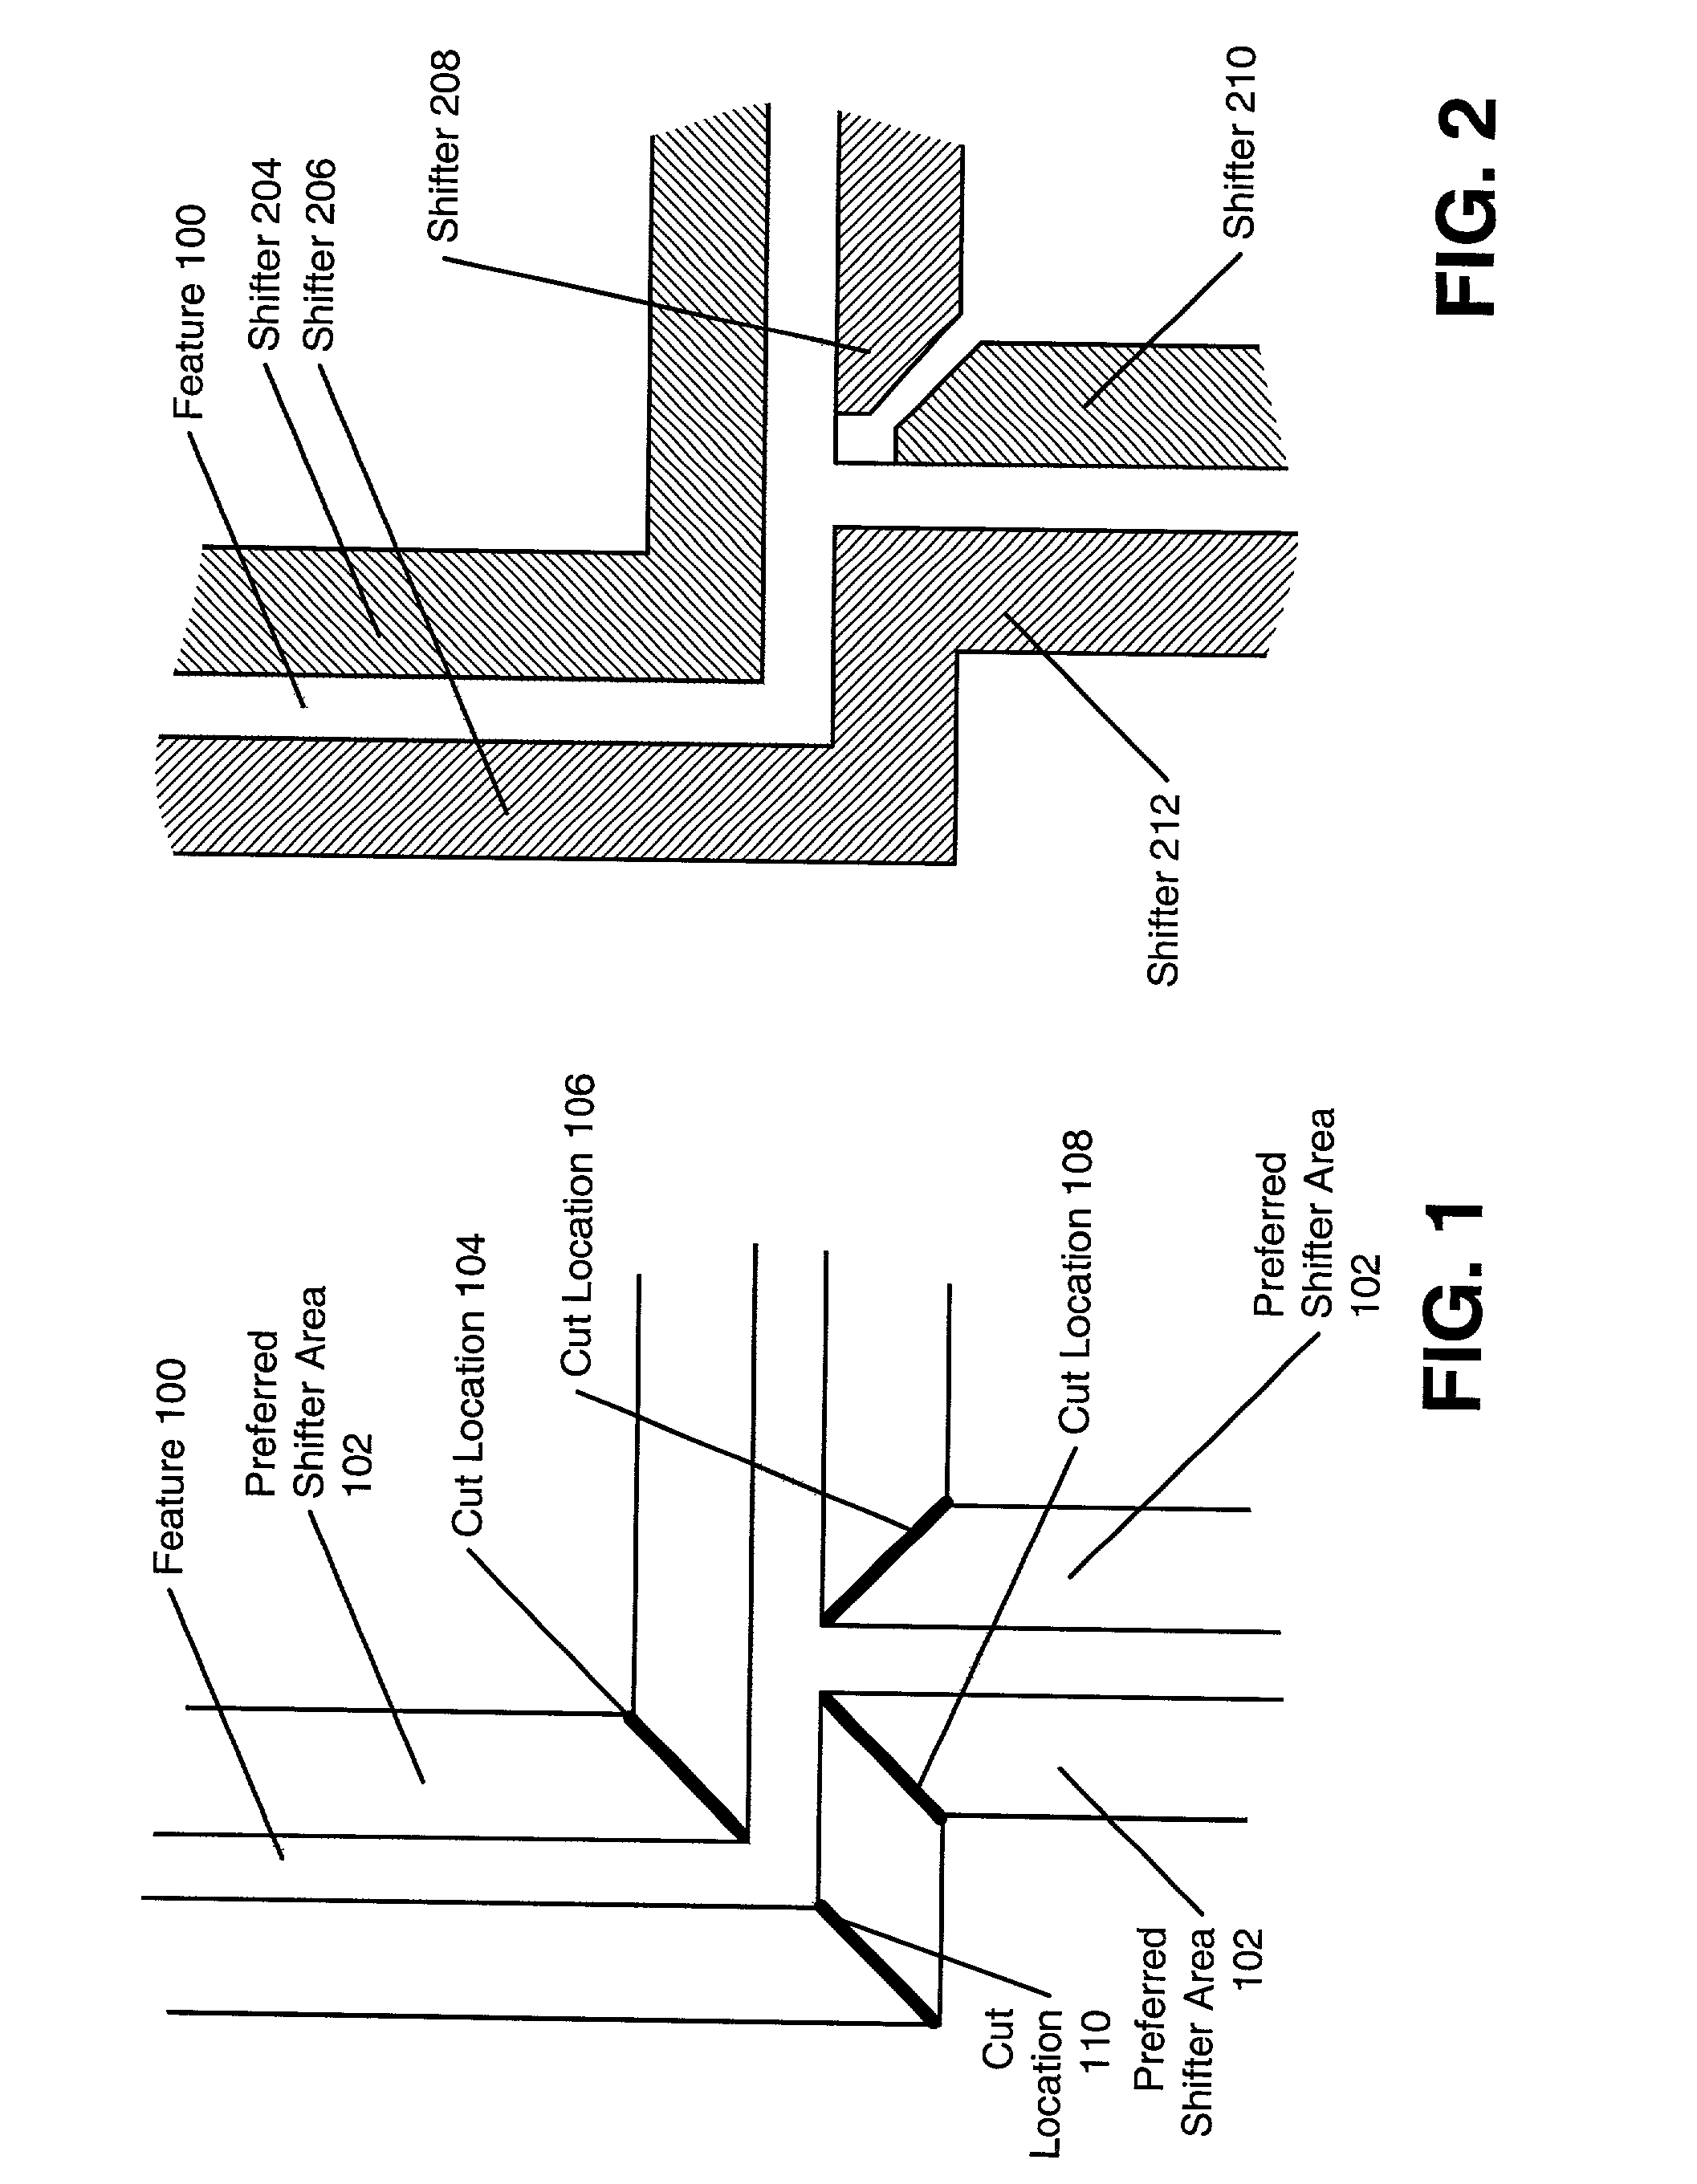 Phase shifting design and layout for static random access memory